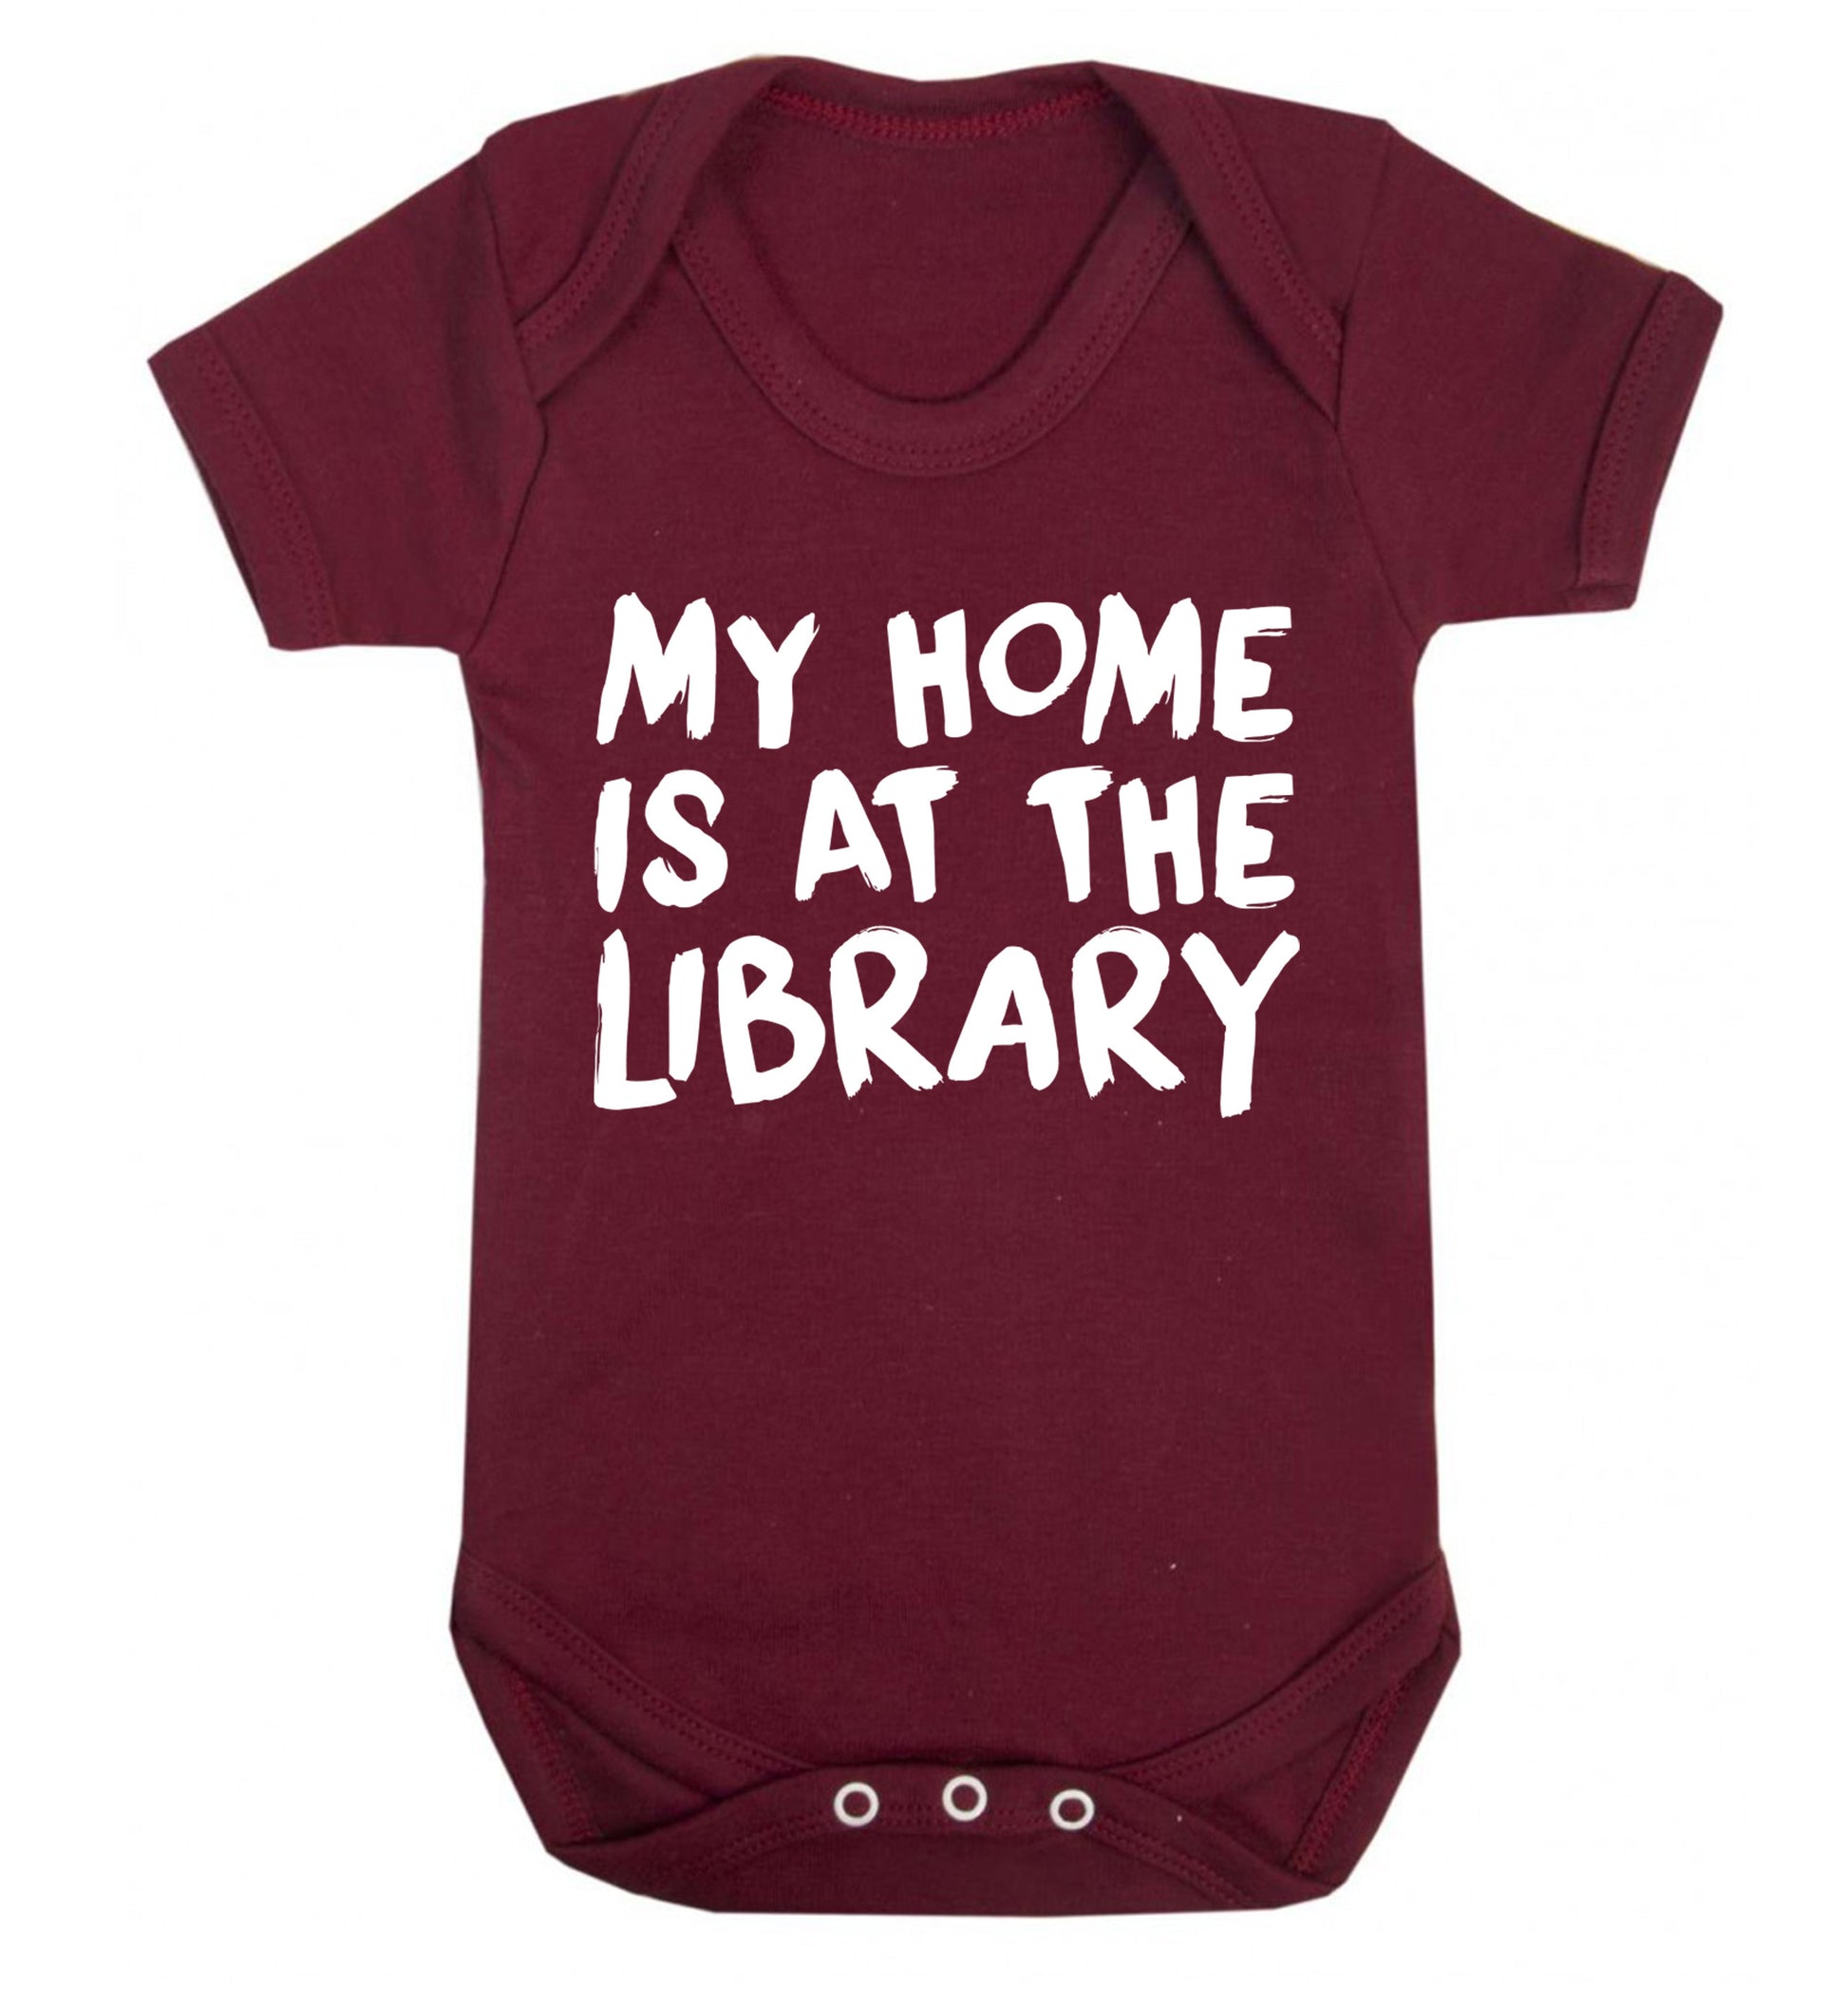 My home is at the library Baby Vest maroon 18-24 months